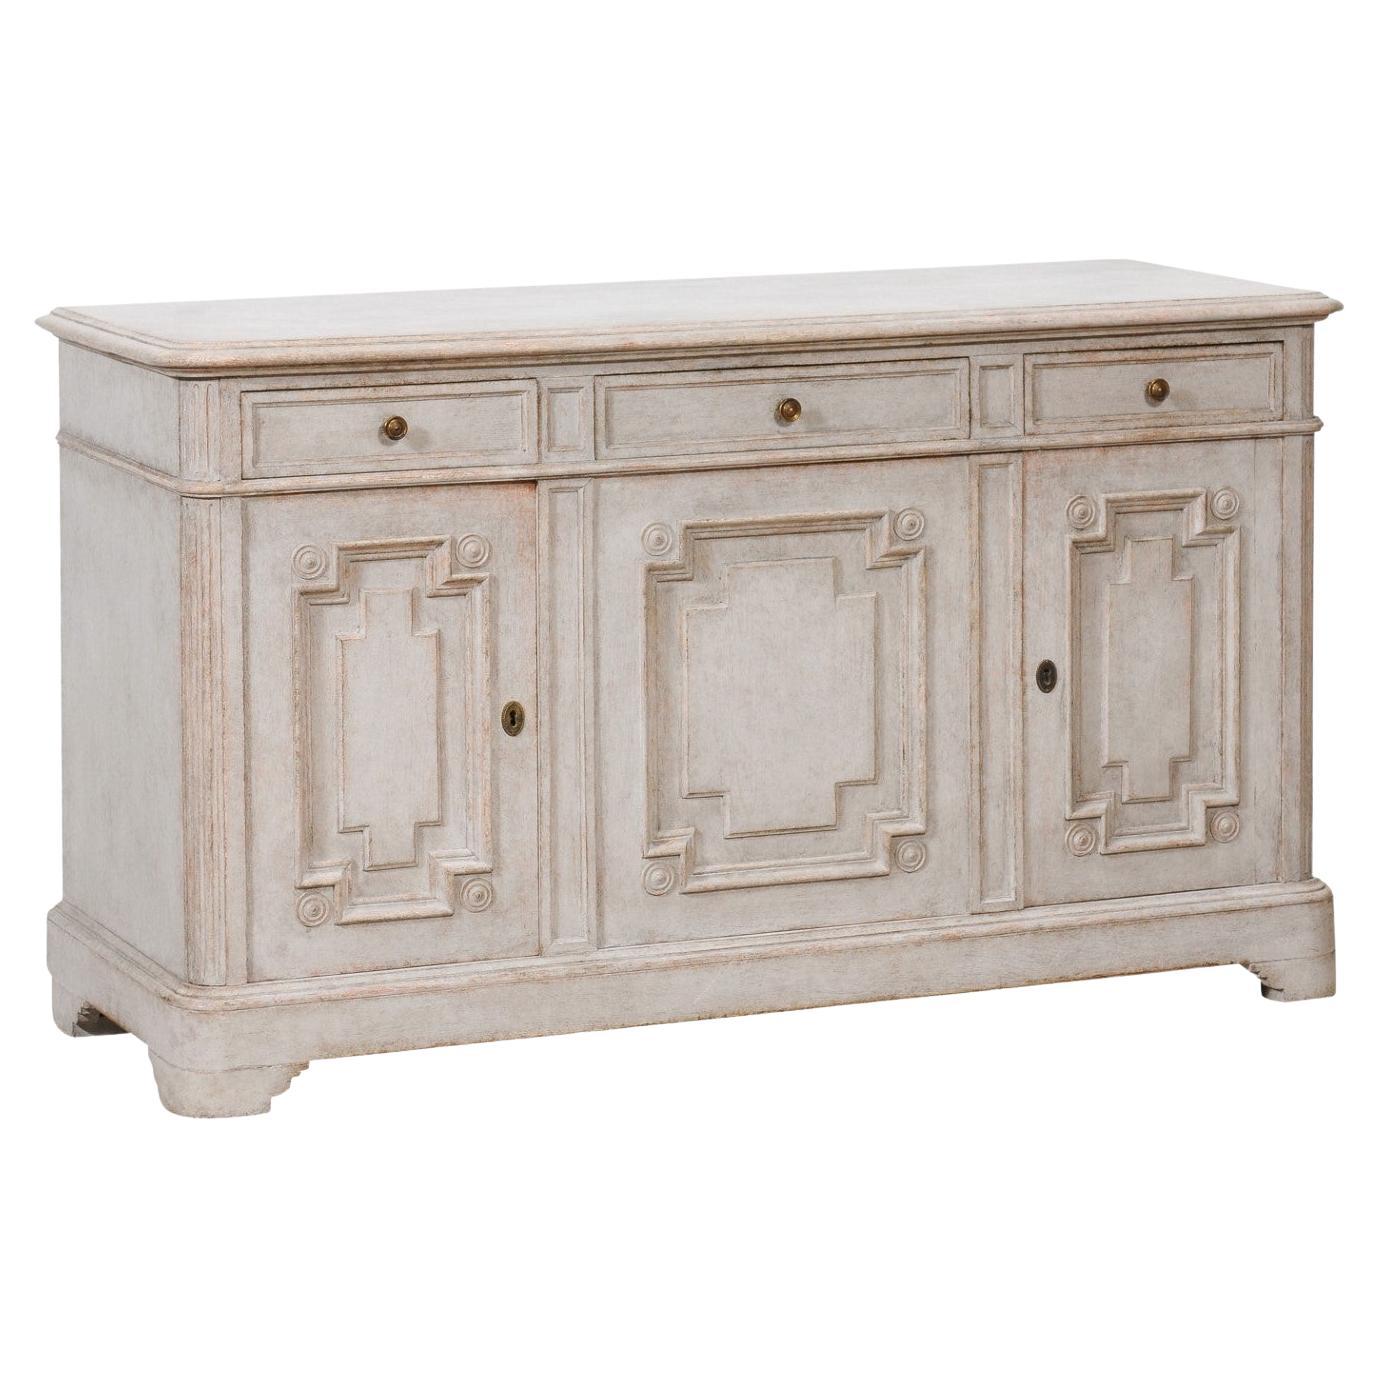 Swedish Gustavian Style 1890s Painted Sideboard with Carved Geometric Motifs